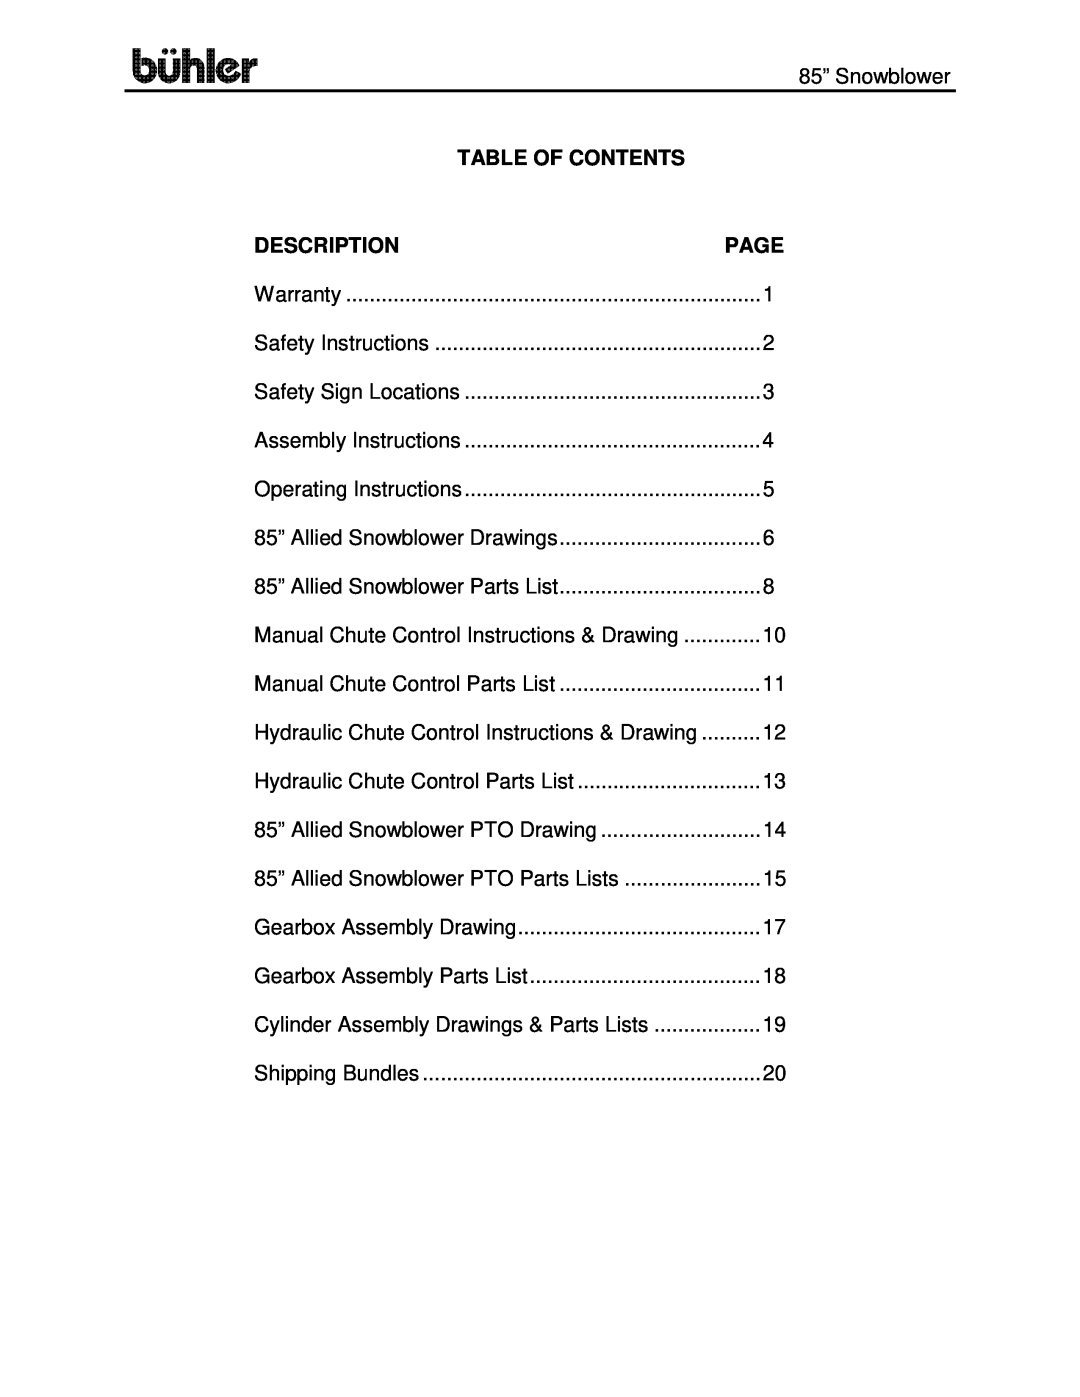 Buhler FK314 Table Of Contents, Description, Page, 85” Snowblower, Warranty, Safety Instructions, Safety Sign Locations 